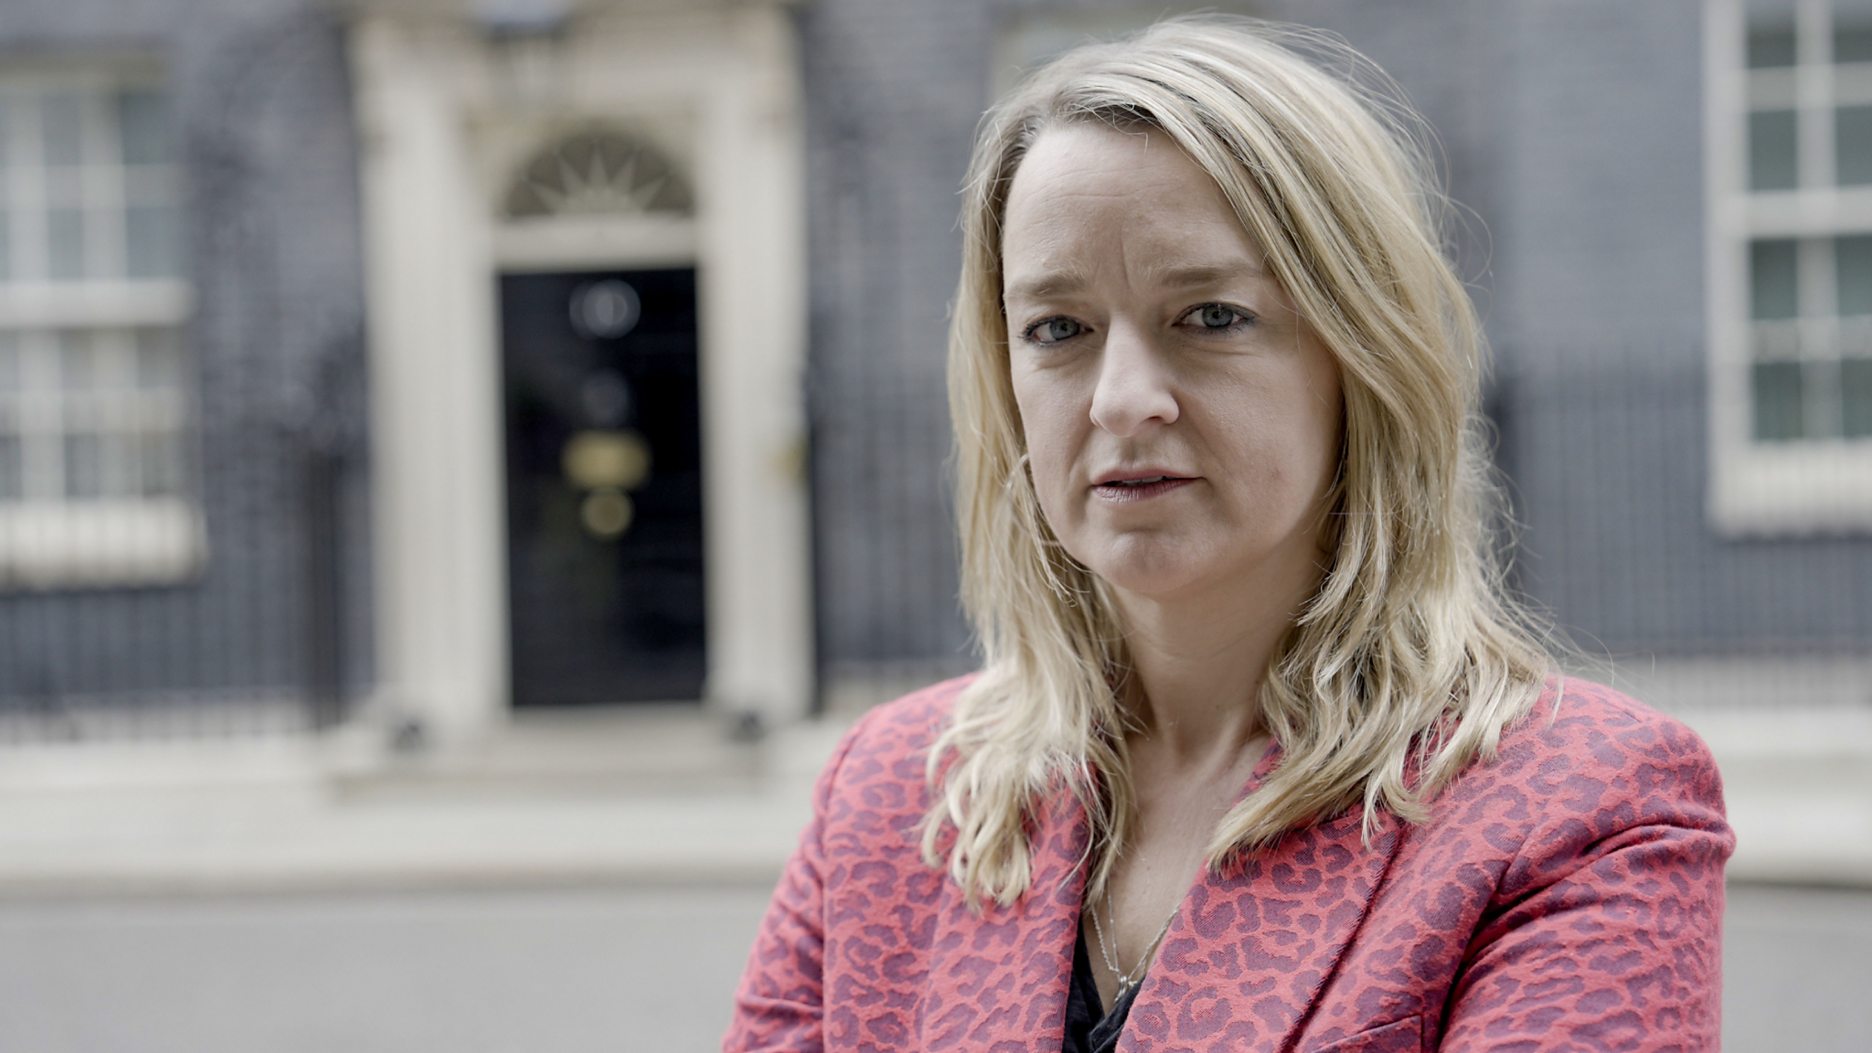 BBC Two confirms three-part documentary series, Laura Kuenssberg: State of Chaos